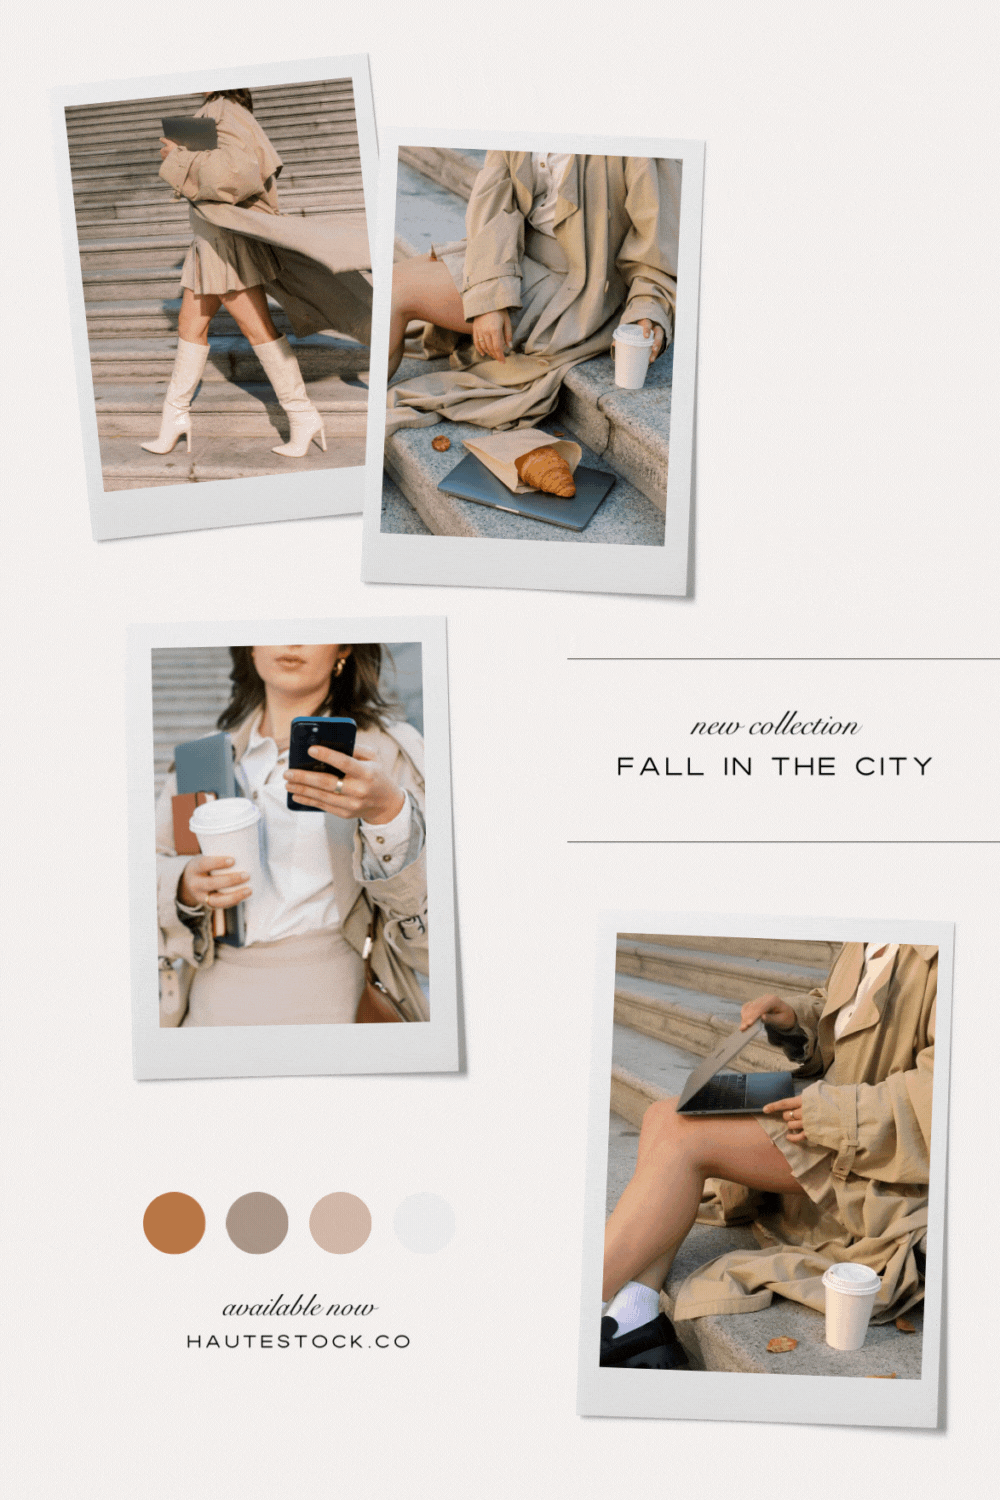 Mood board for Fall in the City, an aesthetic fall lifestyle stock photo and video collection in neutral color palette perfect for fashion bloggers, business coaches and edgy entrpreneurs.